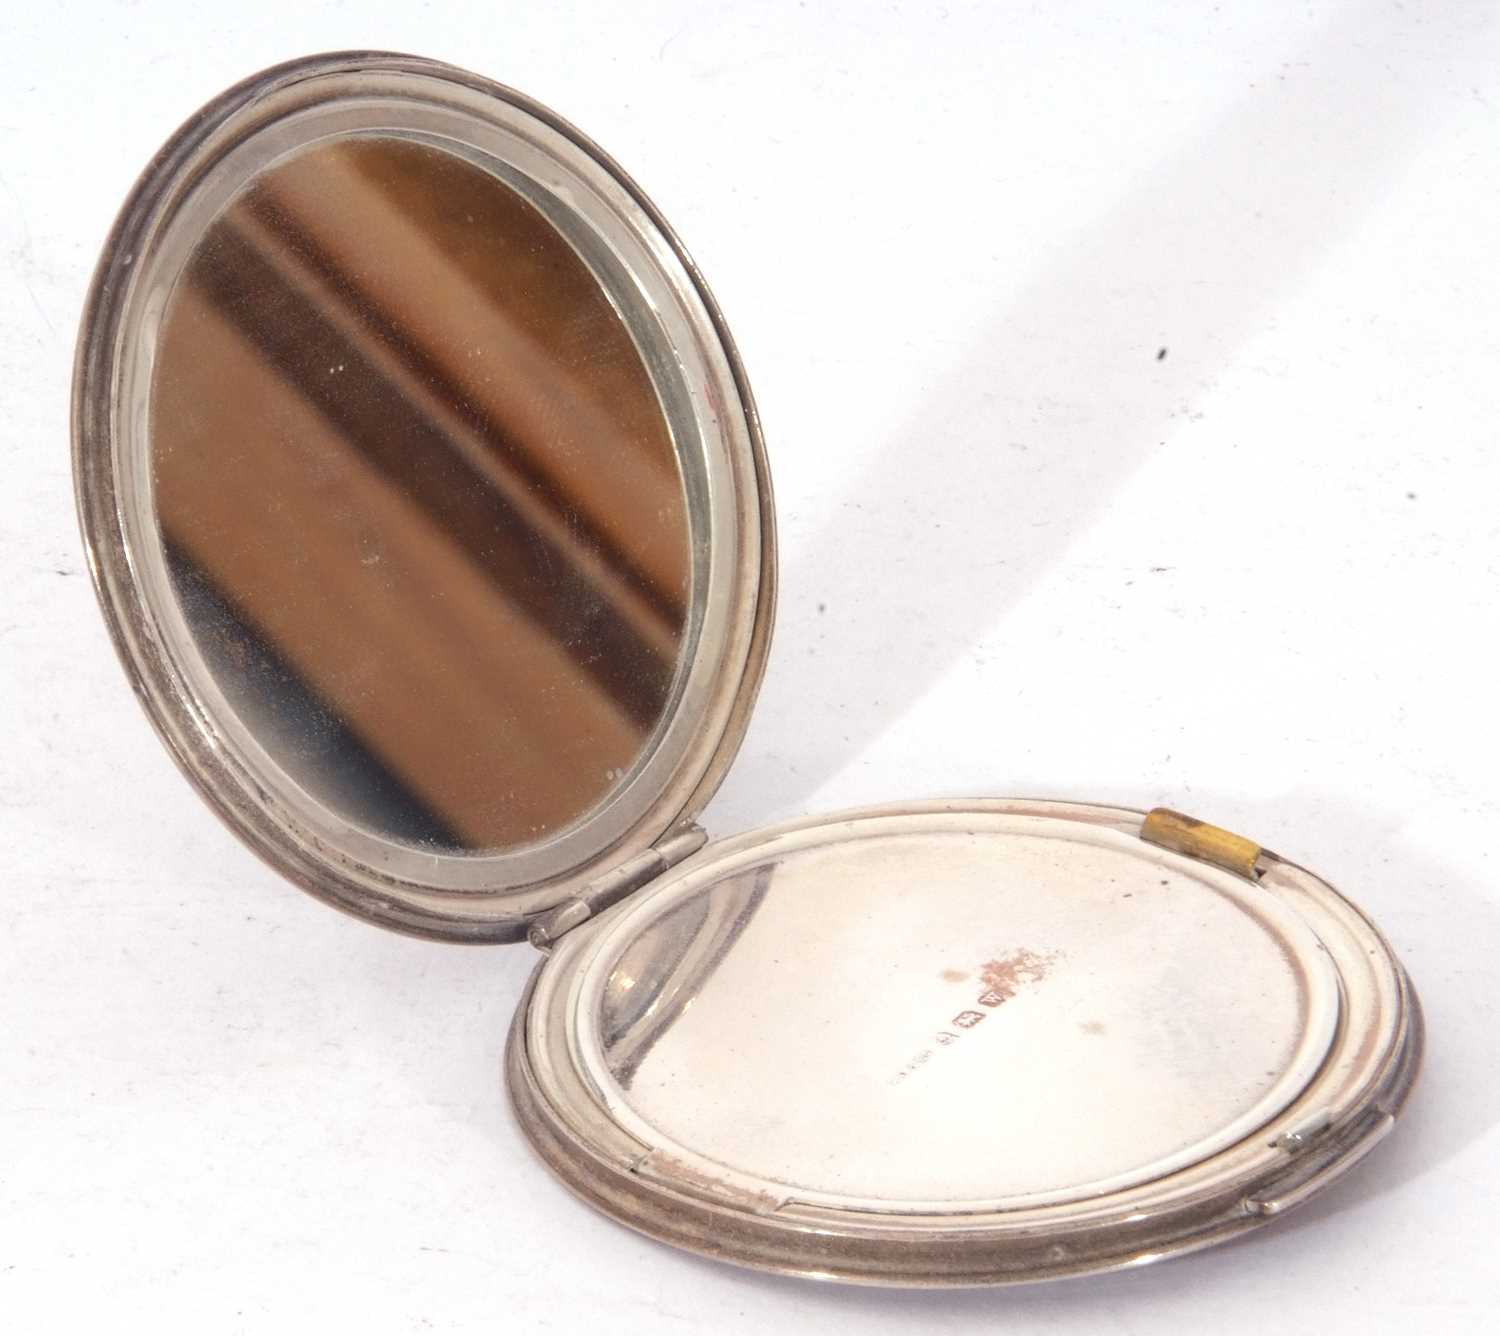 George VI circular compact with banded engine turned decoration having internal mirror and powder - Image 4 of 4